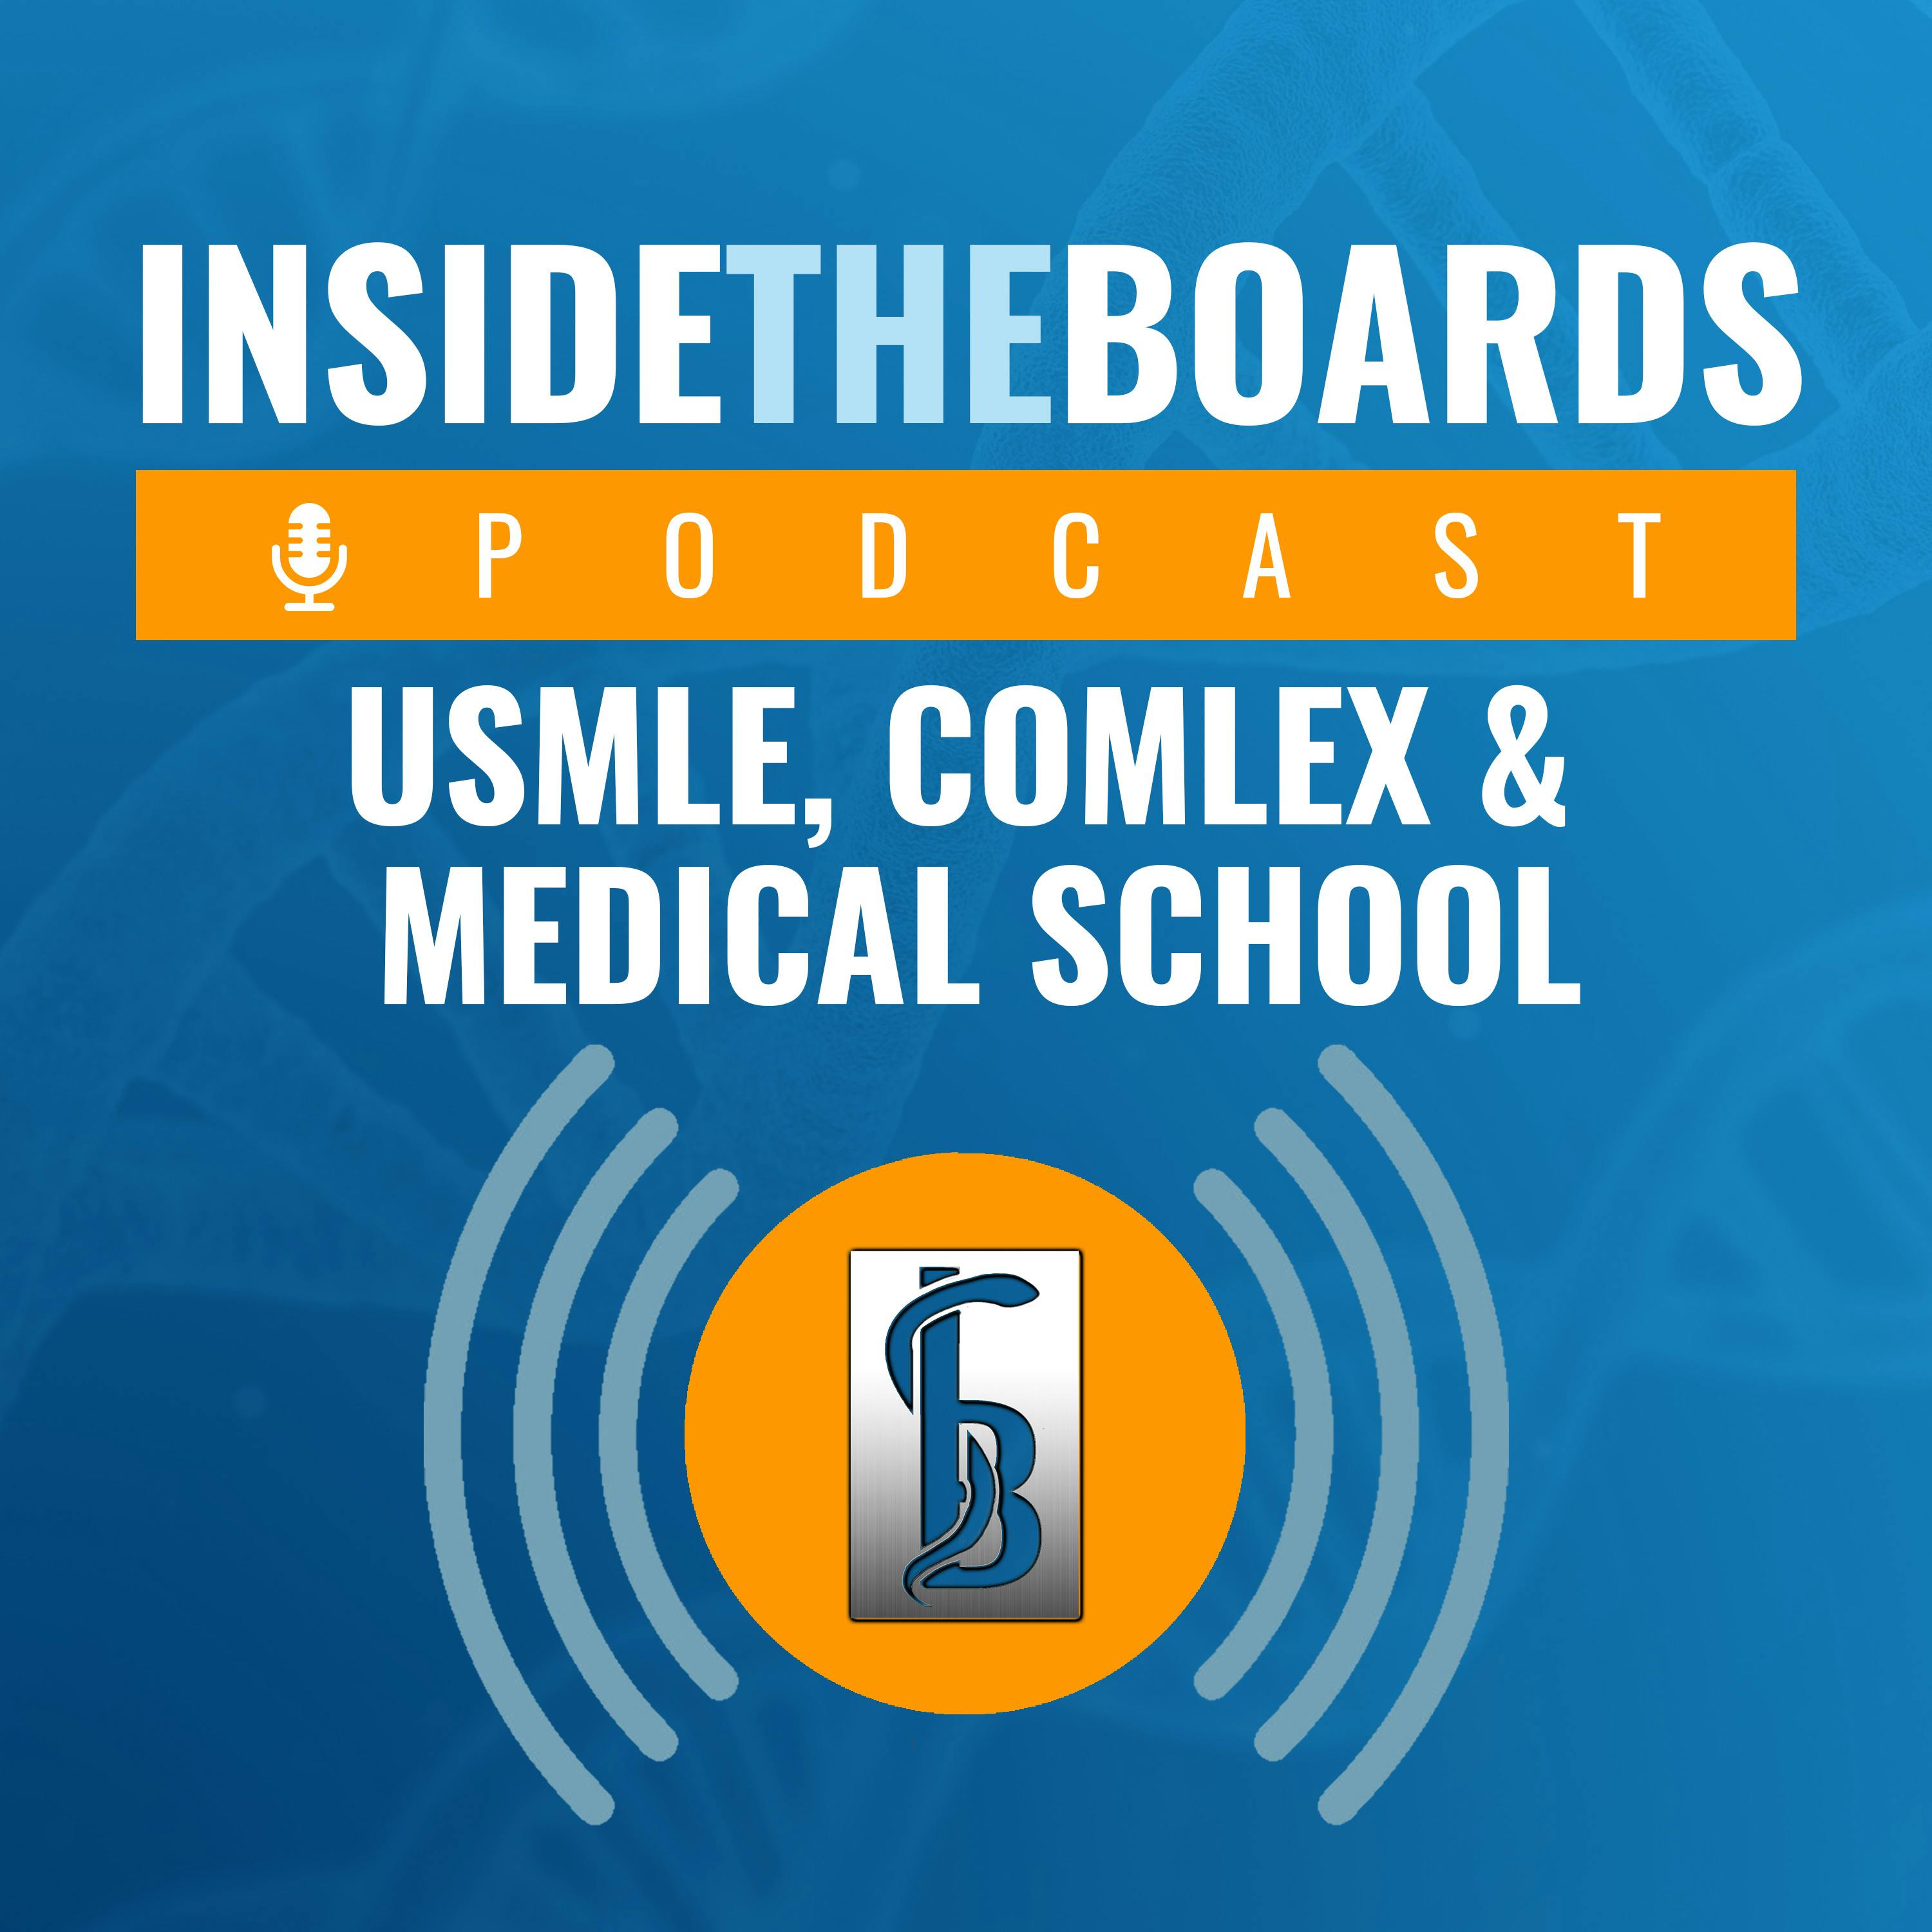 The Physiology of Medical Education and USMLE Prep (Part 1) with Rhett and Michael from Physeo